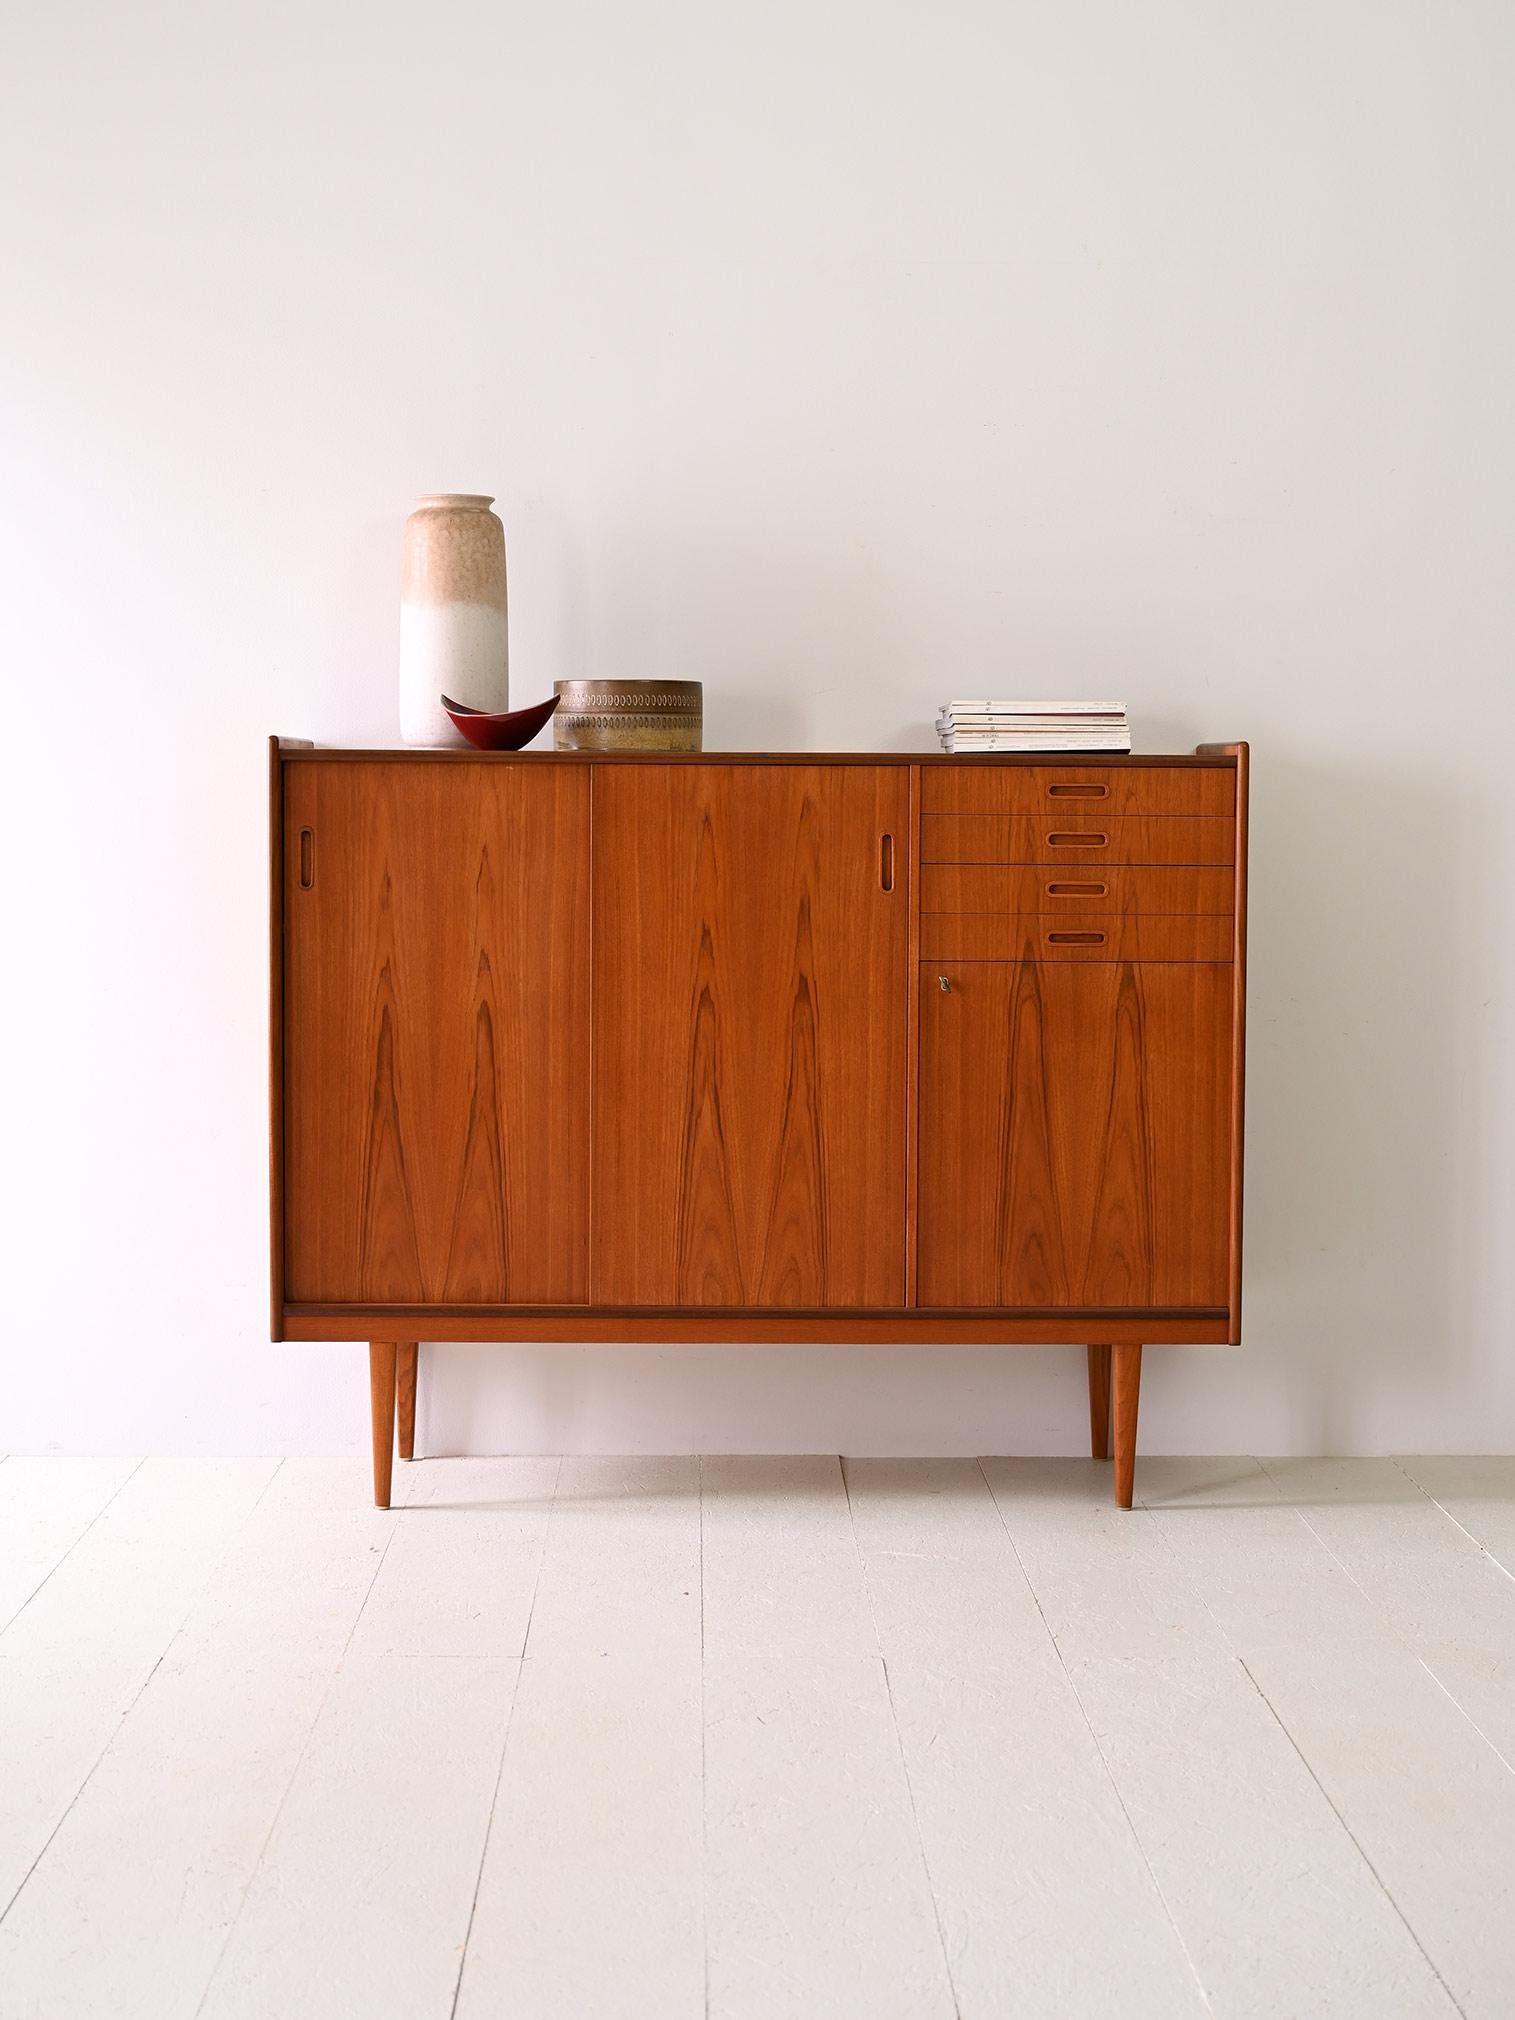 Simple, clean forms for this mid-century vintage Scandinavian teak wood sideboard/highboard.

Marked wood grain and classically Scandinavian shaped legs characterize this capacious sideboard.

Its strong point is its height of 120 cm and shallow